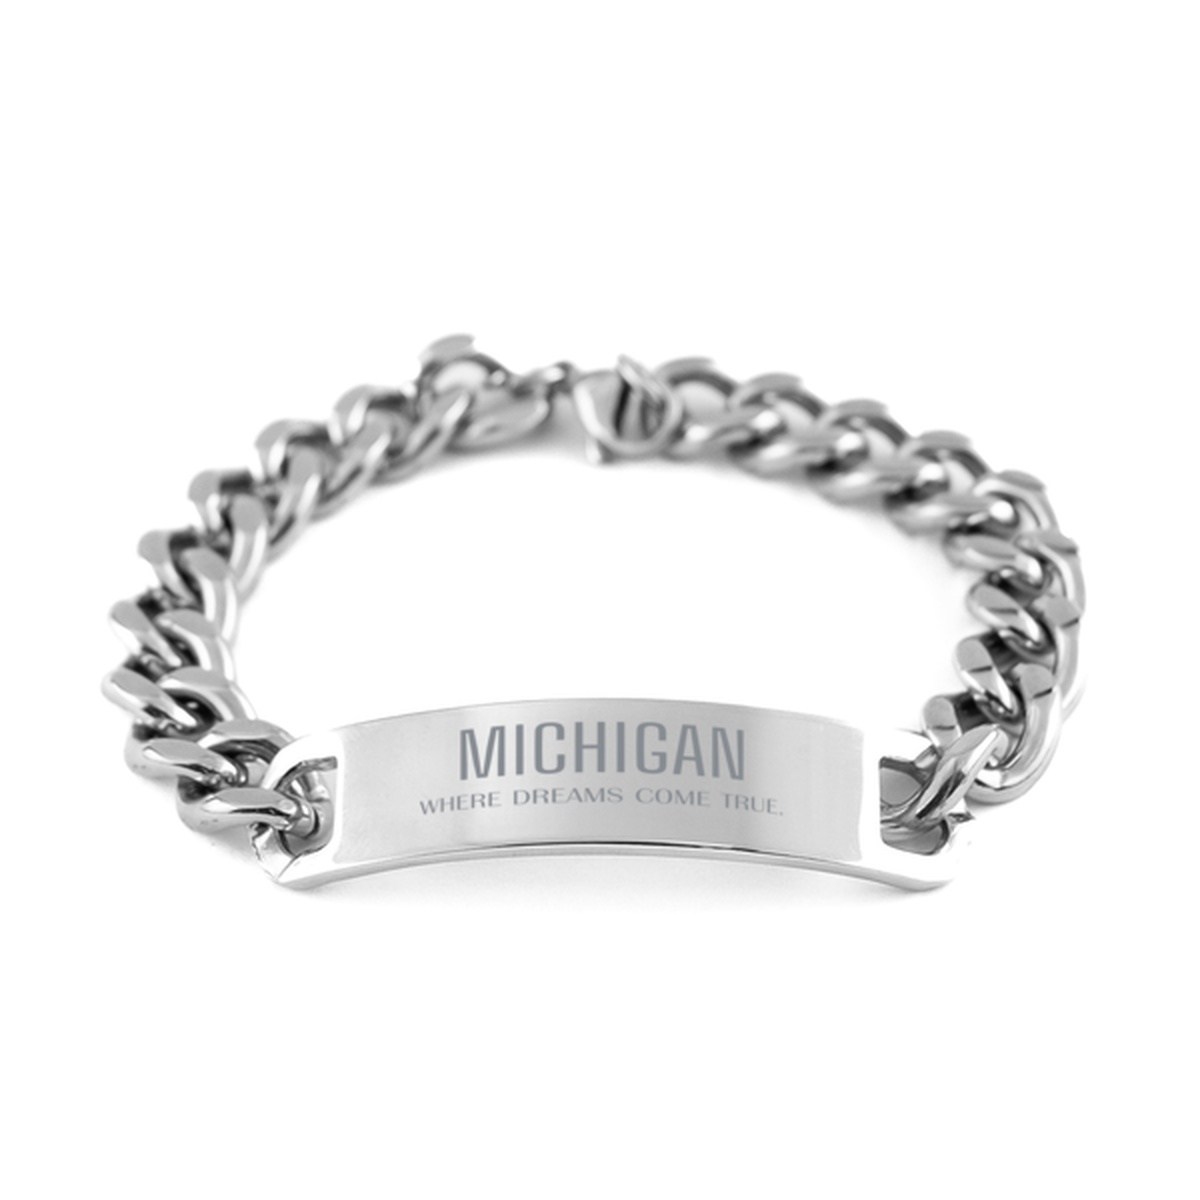 Love Michigan State Cuban Chain Stainless Steel Bracelet, Michigan Where dreams come true, Birthday Inspirational Gifts For Michigan Men, Women, Friends